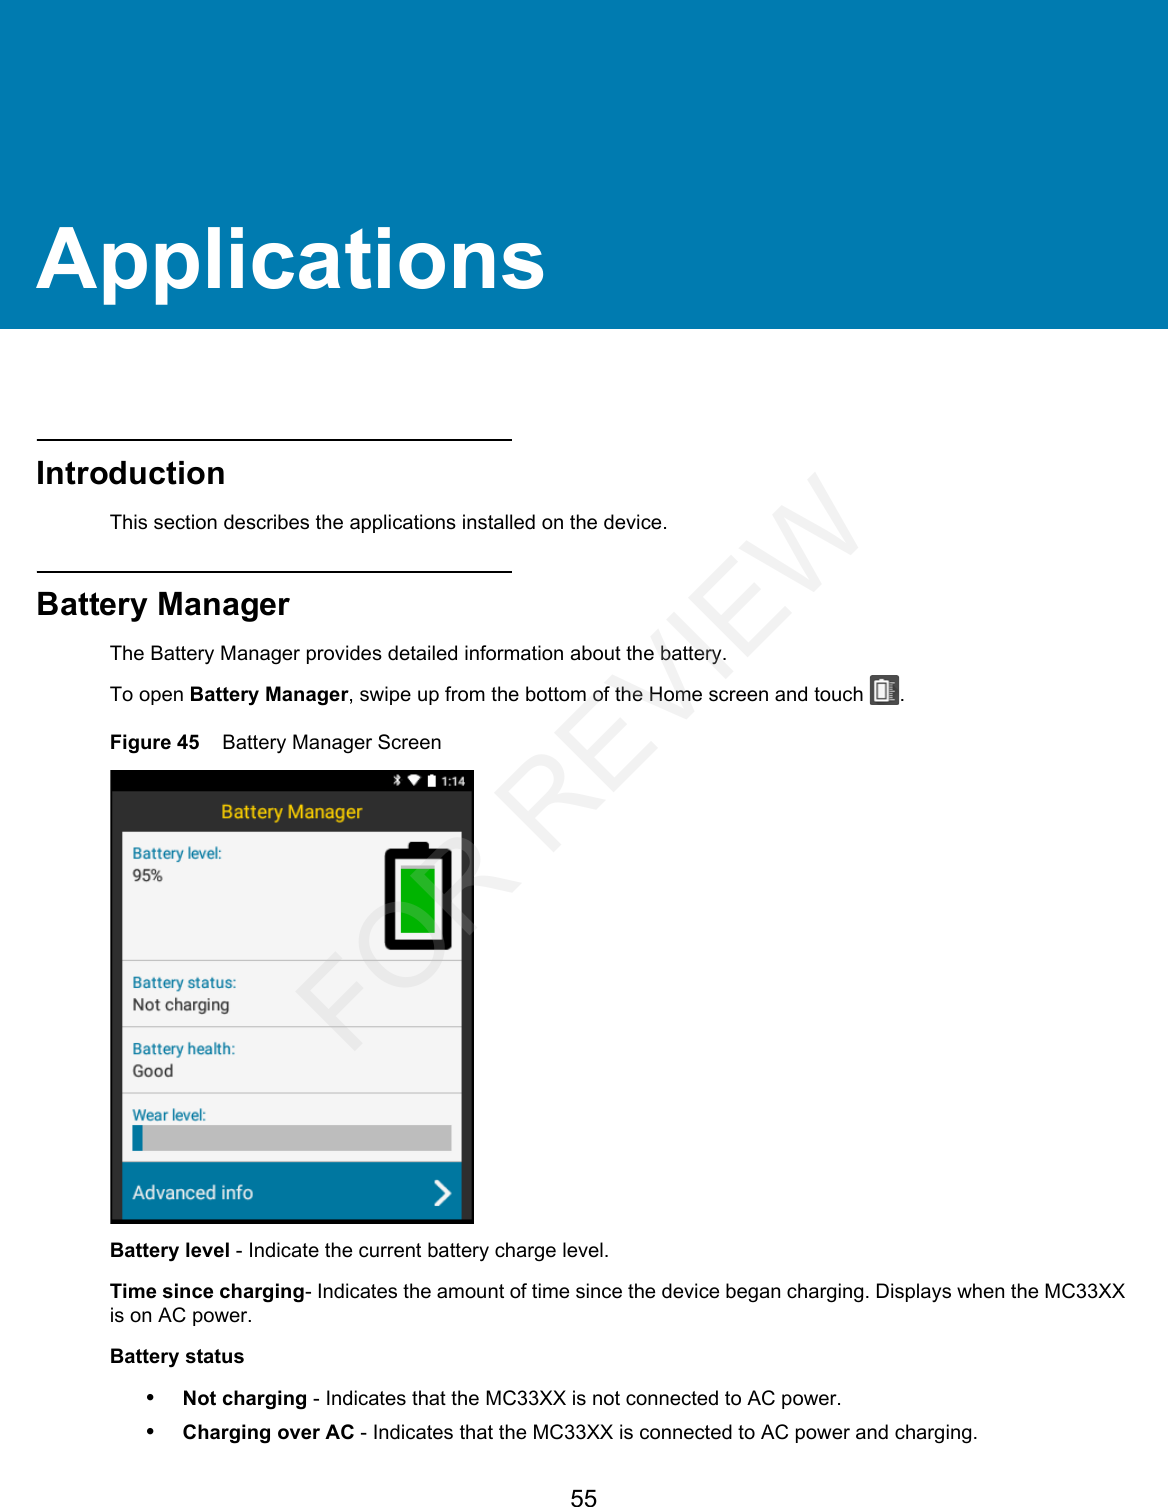 55ApplicationsIntroductionThis section describes the applications installed on the device.Battery ManagerThe Battery Manager provides detailed information about the battery.To open Battery Manager, swipe up from the bottom of the Home screen and touch  .Figure 45    Battery Manager ScreenBattery level - Indicate the current battery charge level.Time since charging- Indicates the amount of time since the device began charging. Displays when the MC33XX is on AC power.Battery status•Not charging - Indicates that the MC33XX is not connected to AC power.•Charging over AC - Indicates that the MC33XX is connected to AC power and charging.FOR REVIEW